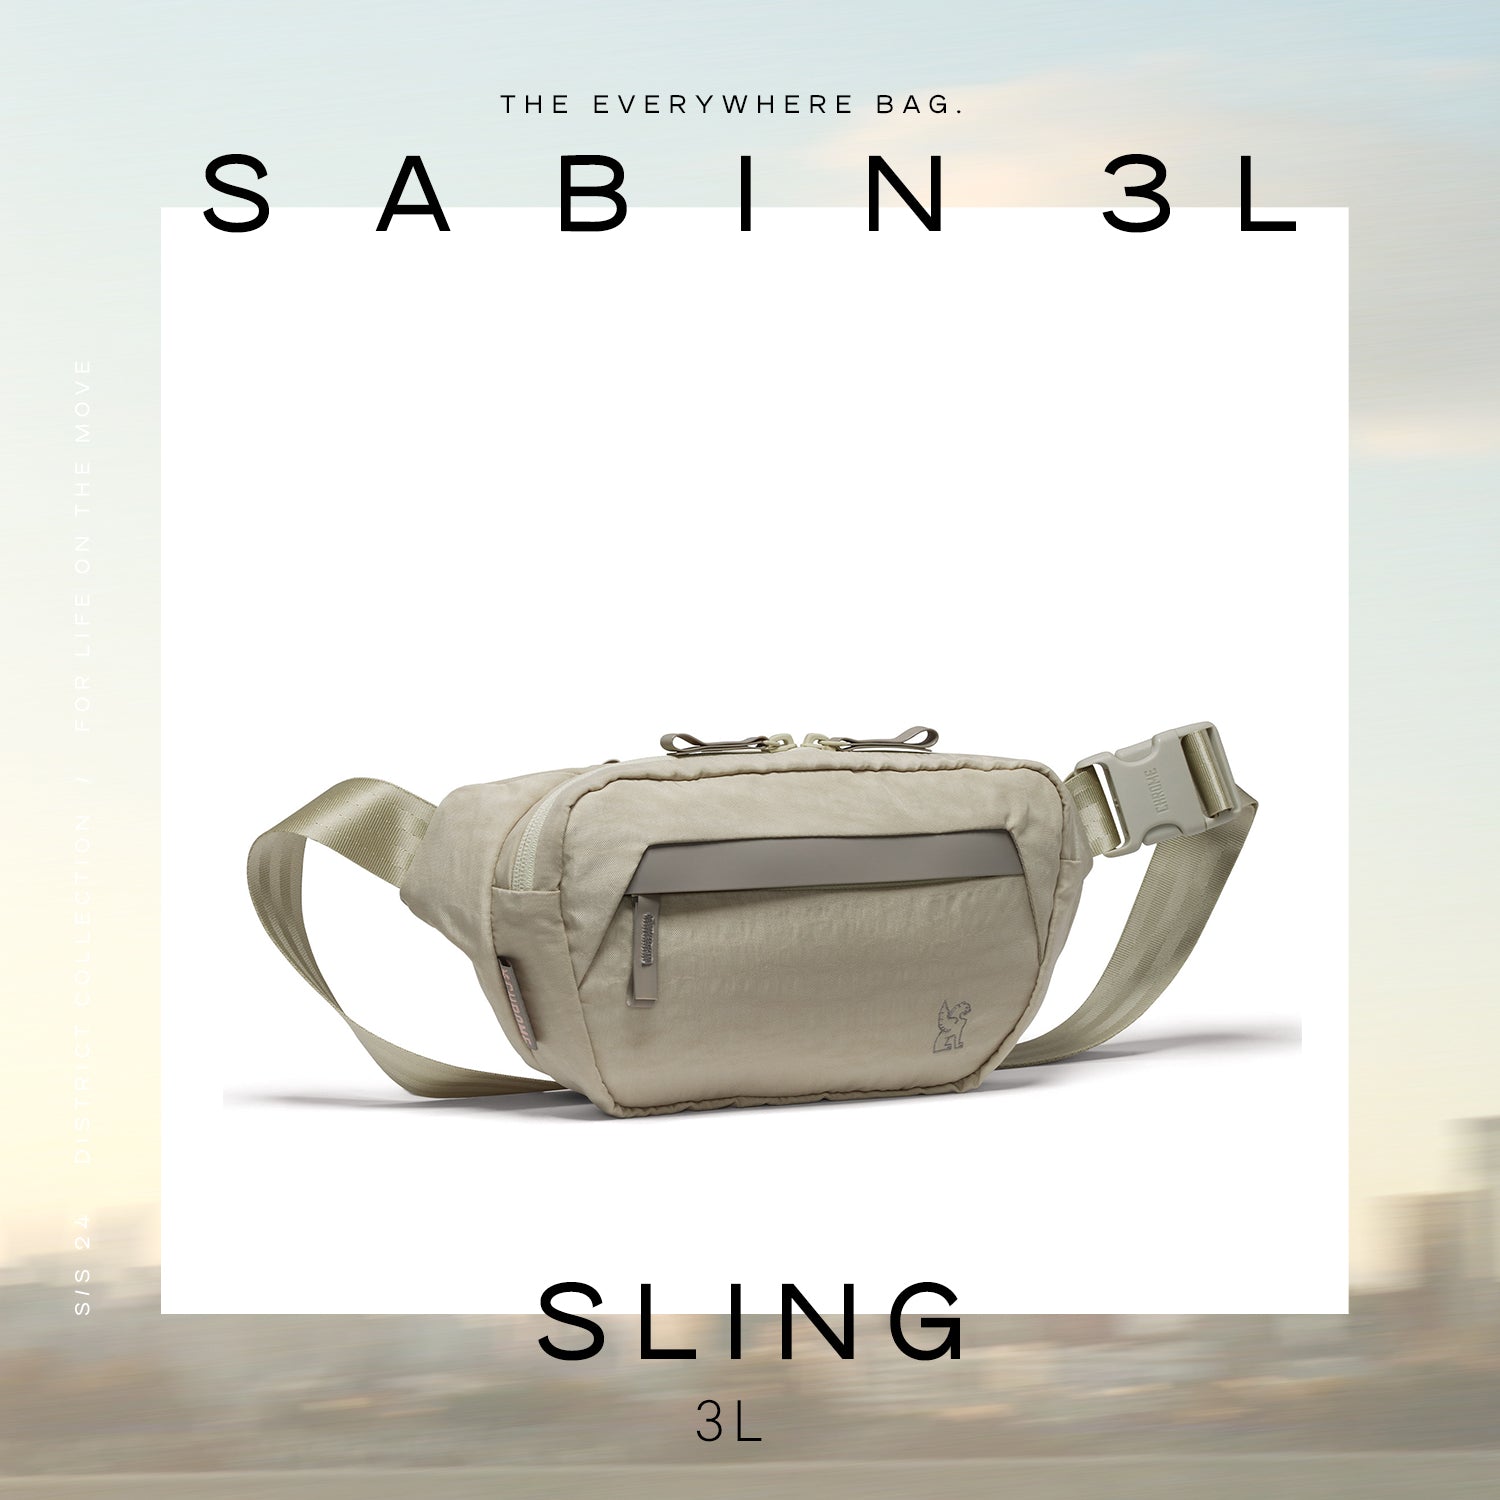 Sabin 3L Sling in sandstone, part of the district collection